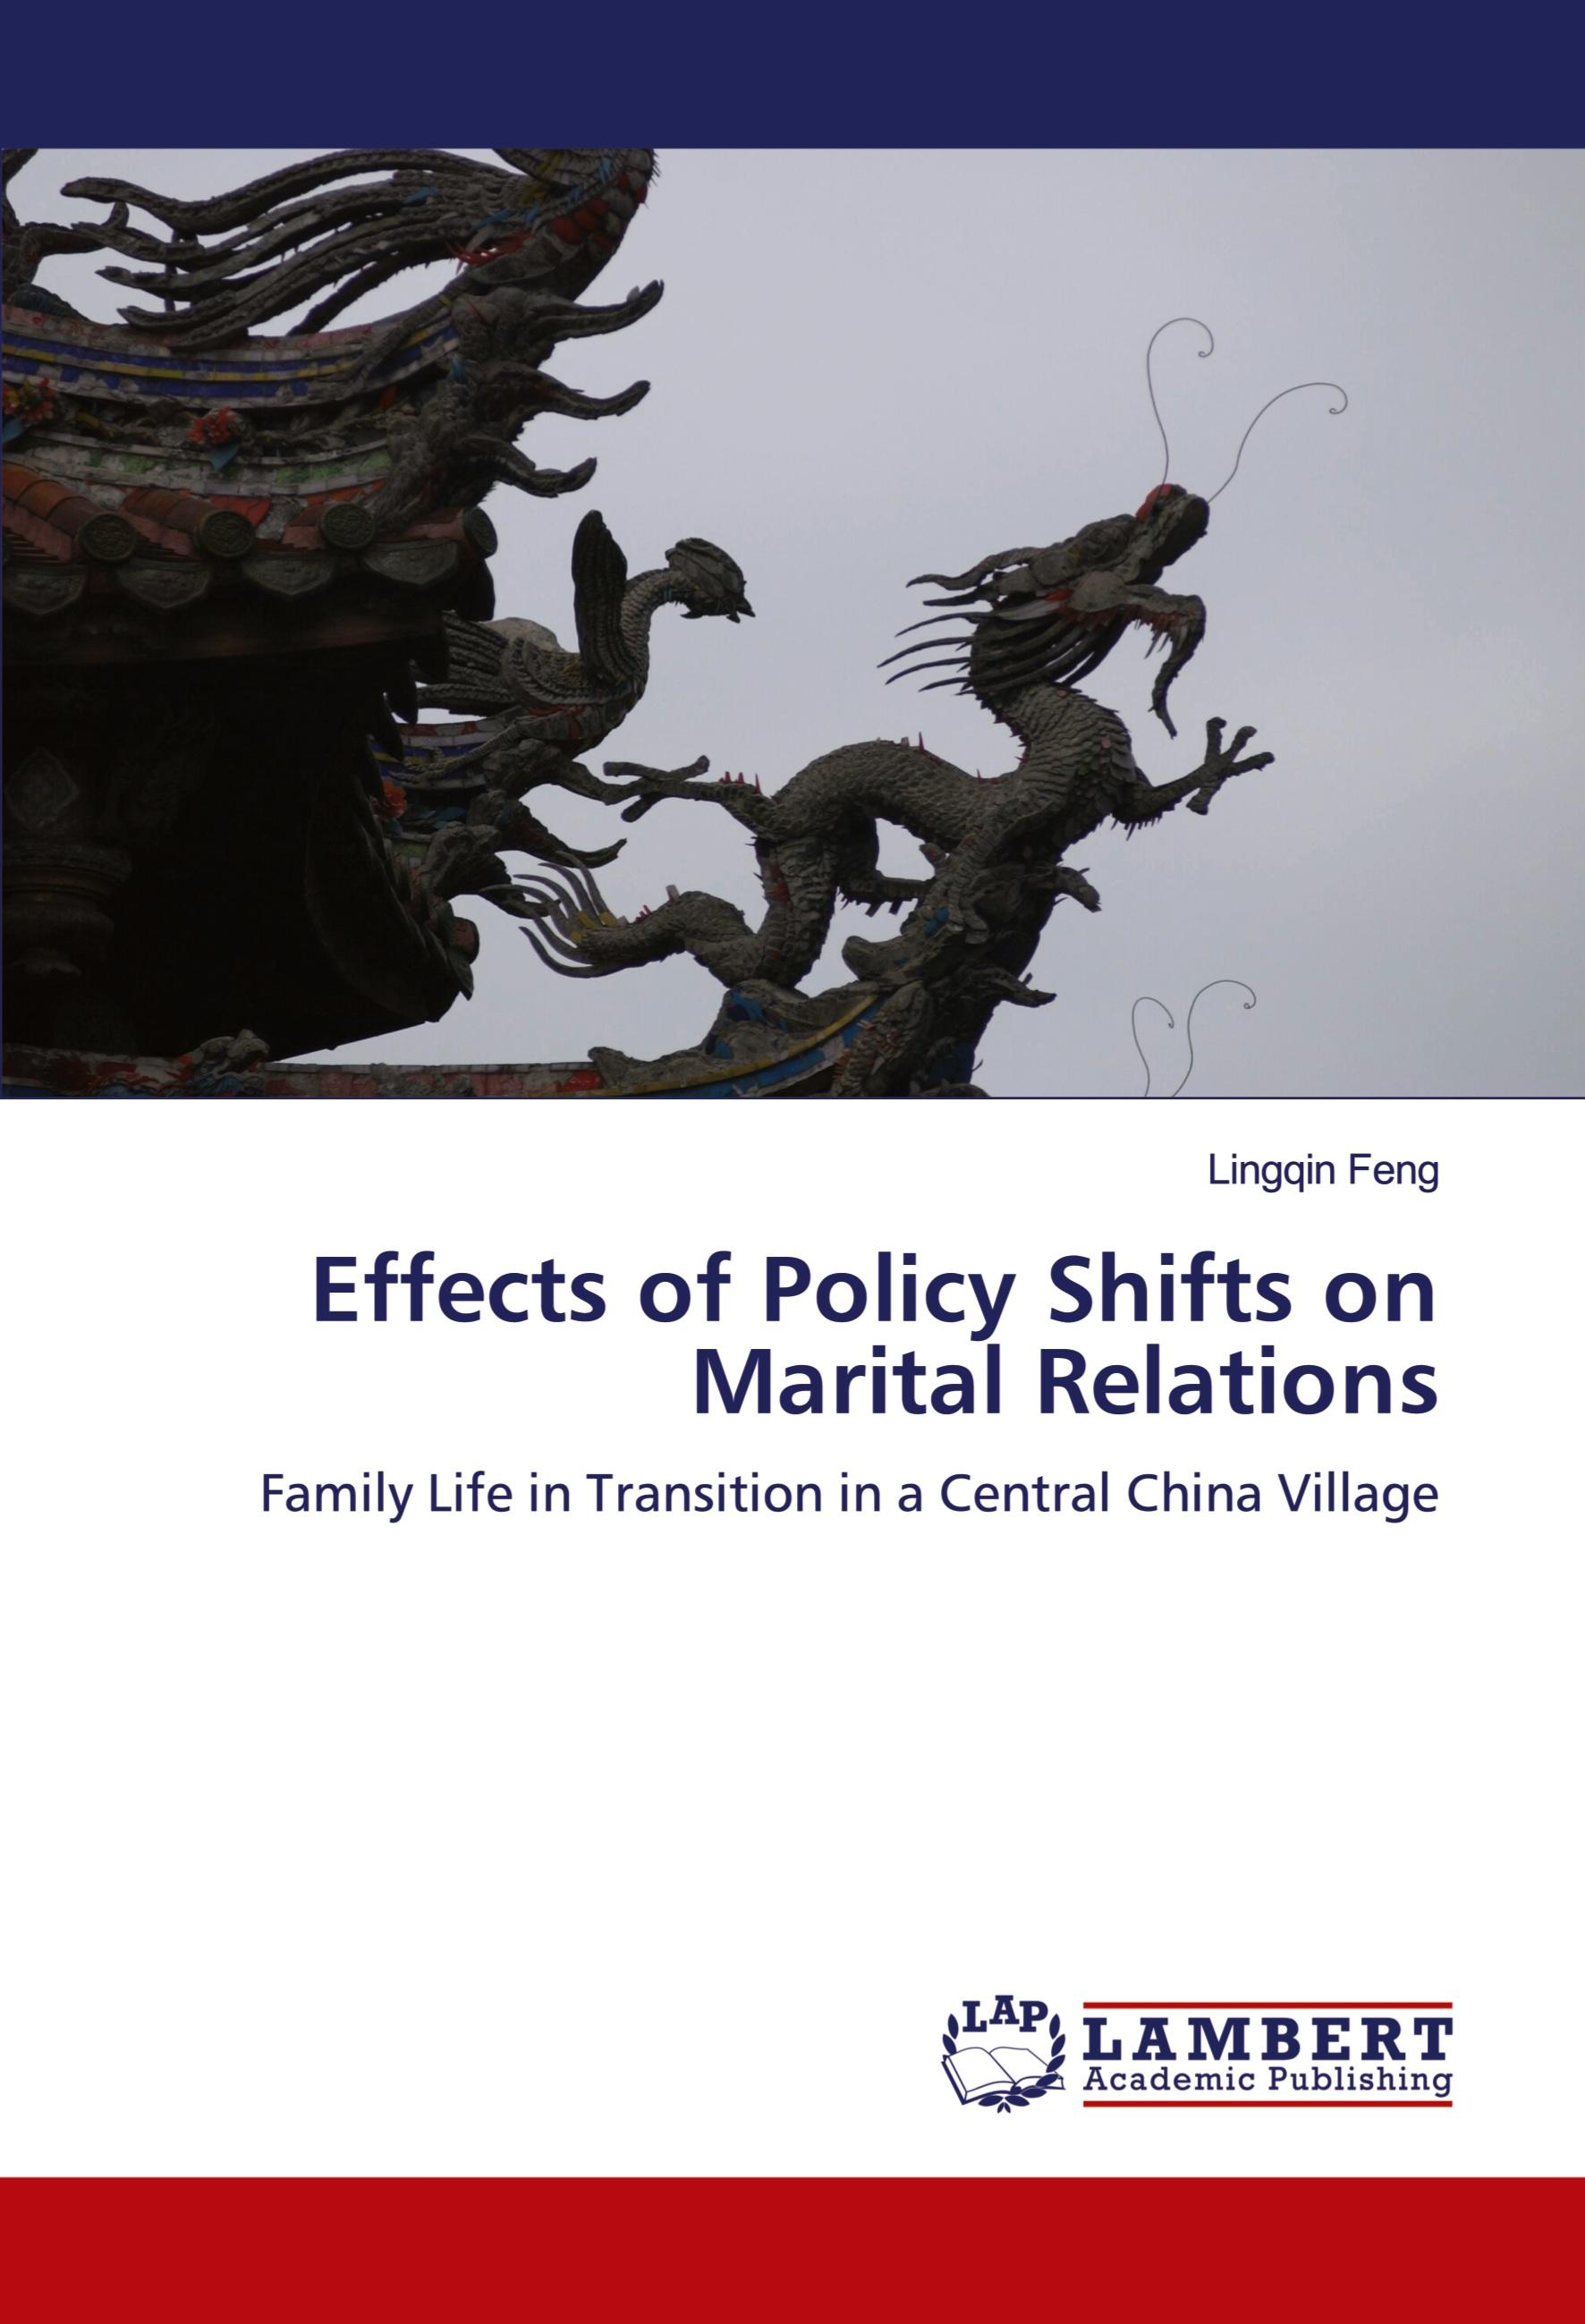 Effects of Policy Shifts on Marital Relations | Family Life in Transition in a Central China Village | Lingqin Feng | Taschenbuch | Paperback | 168 S. | Englisch | 2009 | EAN 9783838313504 - Feng, Lingqin